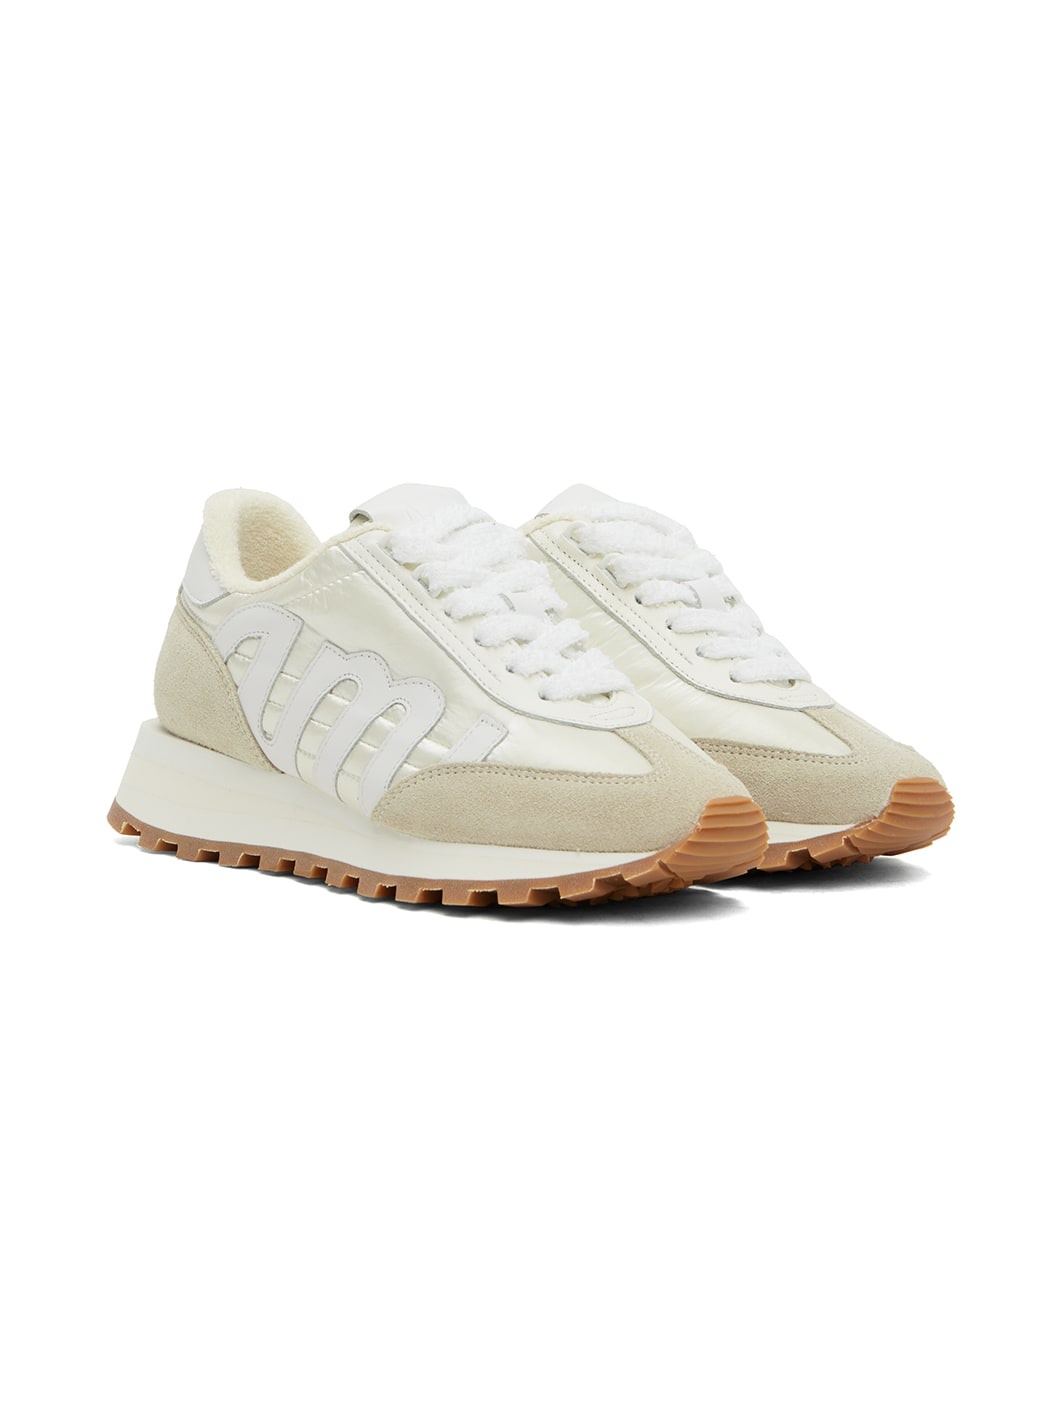 Off-White & Beige Rush Sneakers - 4